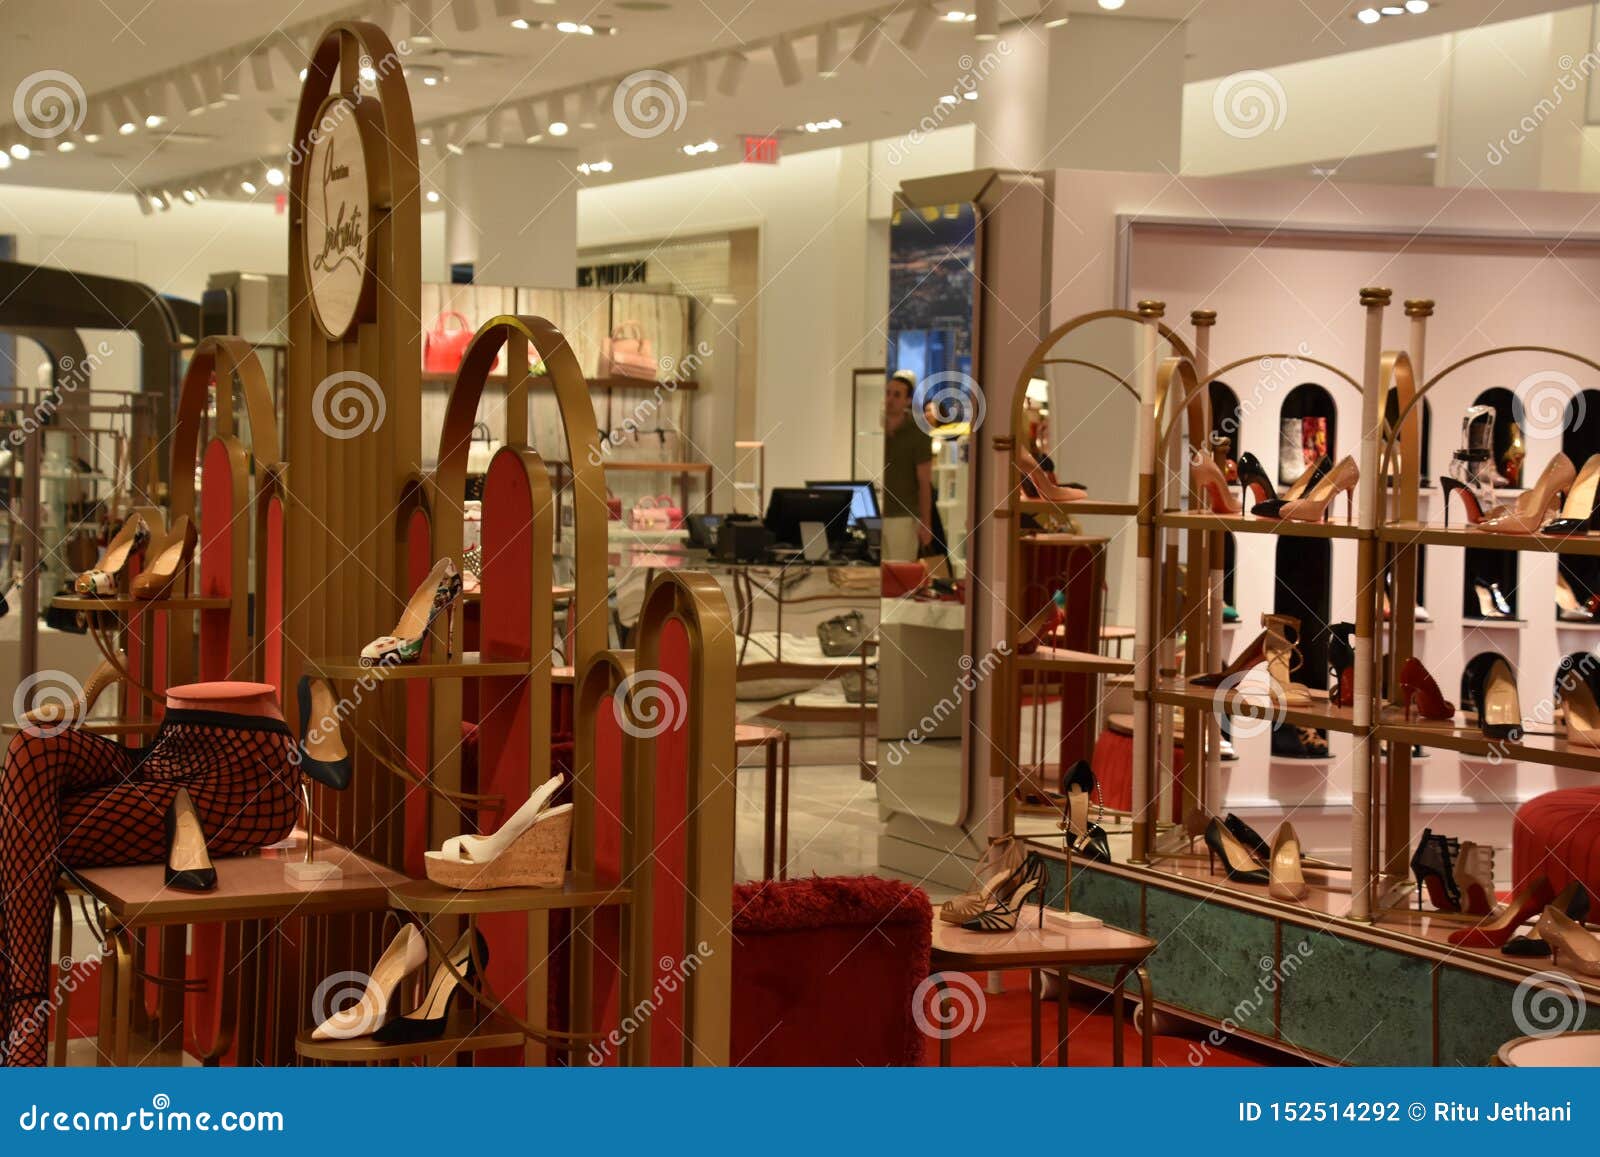 Christian at Neiman Marcus at Shops and Restaurants at Hudson Yards in New York Editorial - Image of beauty, landmark: 152514292